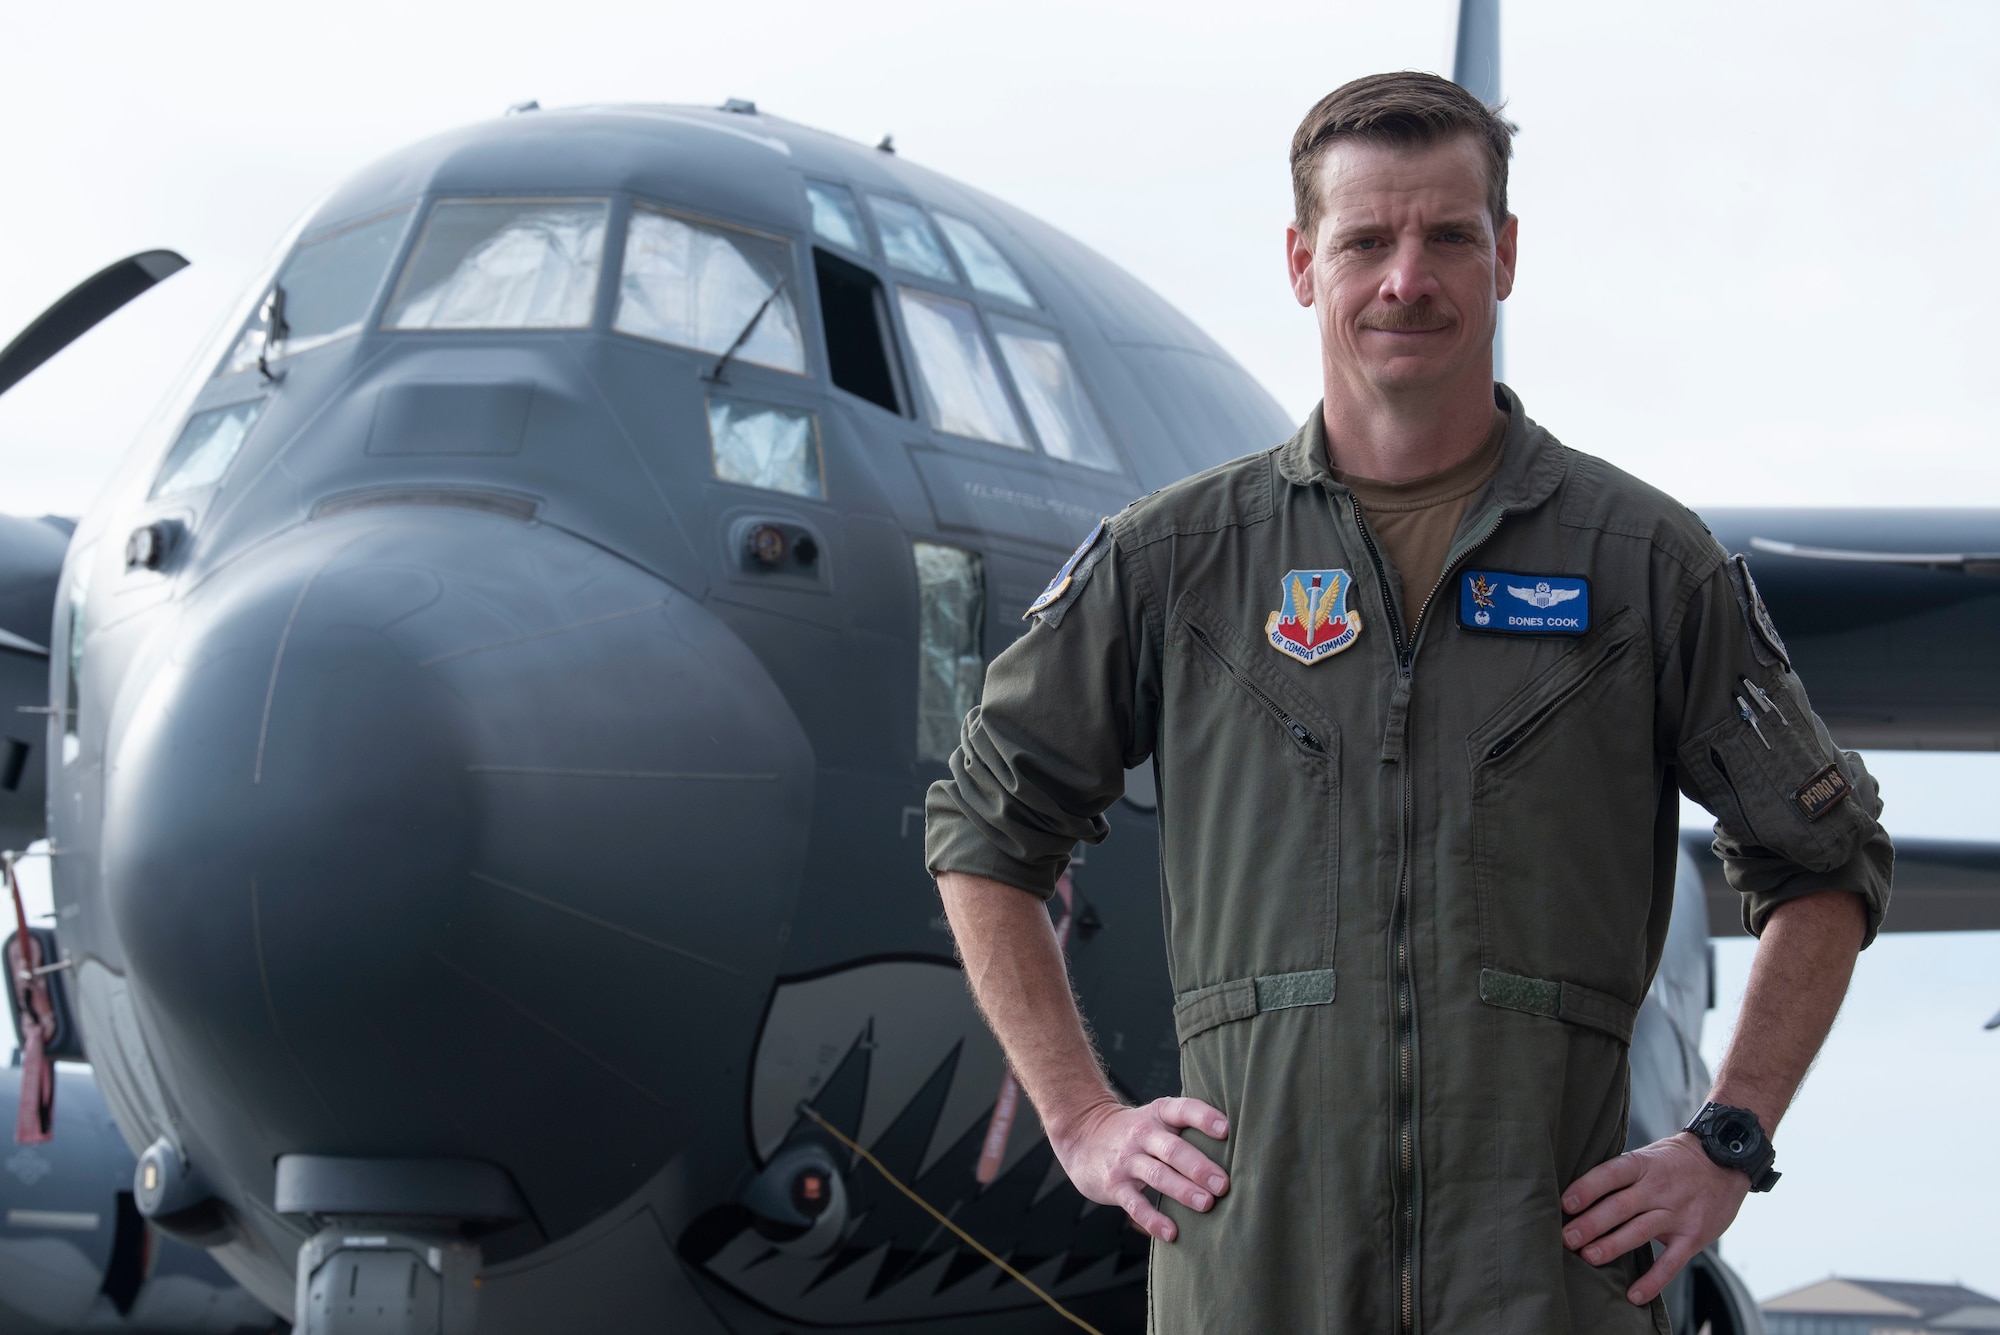 U.S. Air Force Col. Russell “Bones” Cook, 23rd Wing commander,  stands in front of HC-130J Combat King II 13-5785 after a Flagship dedication ceremony at Moody Air Force Base, Georgia, March 30, 2022. A Wing’s Flagship stands as a rallying point for the command. (U.S. Air Force photo by Senior Airman Thomas Johns)